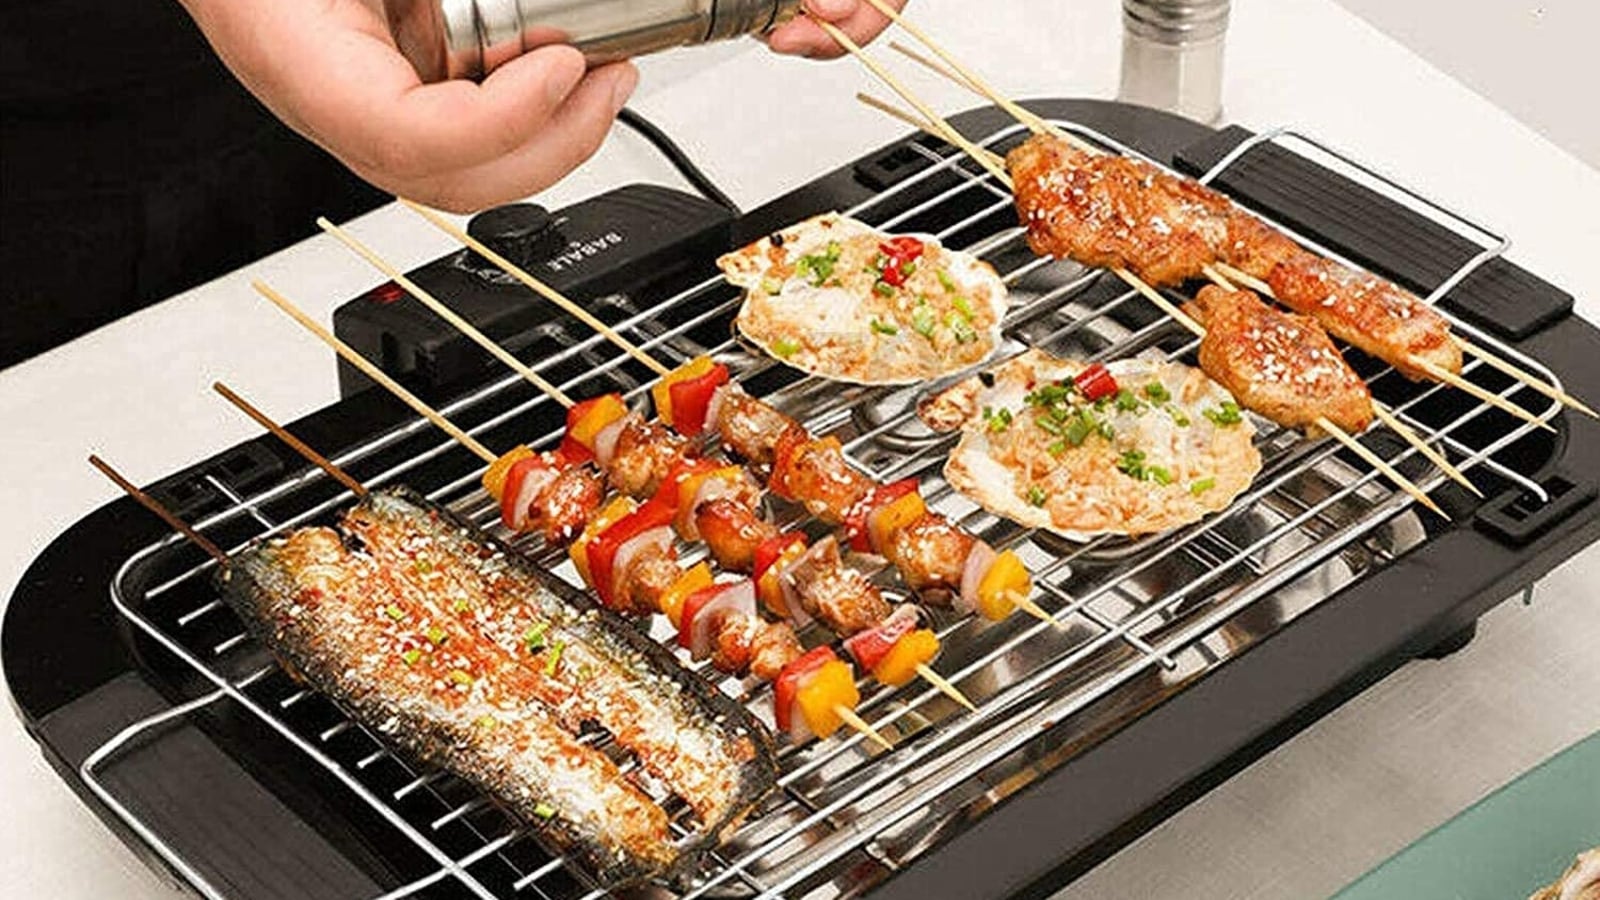 Best electric tandoor grill for home